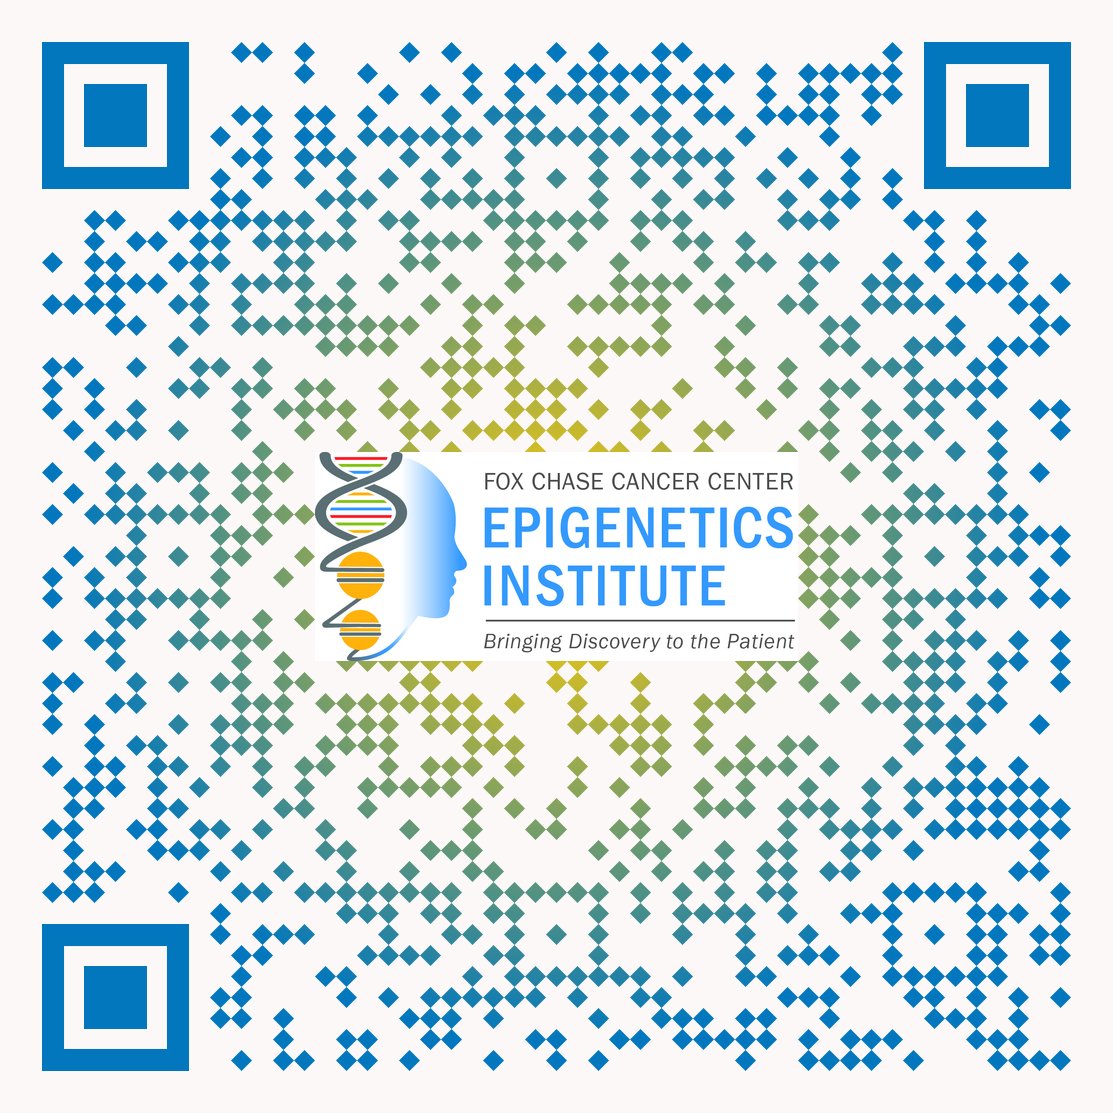 ~Please Re-post~ Free Hybrid @CeiFccc #Epigenetics Sympoium featuring world-leaders in #academia & #Industry We aim to allow anyone, anywhere at any educational level to see top-notch science @ a meeting @ least 1 time per year Free registration- scan QR code @FoxChaseCancer